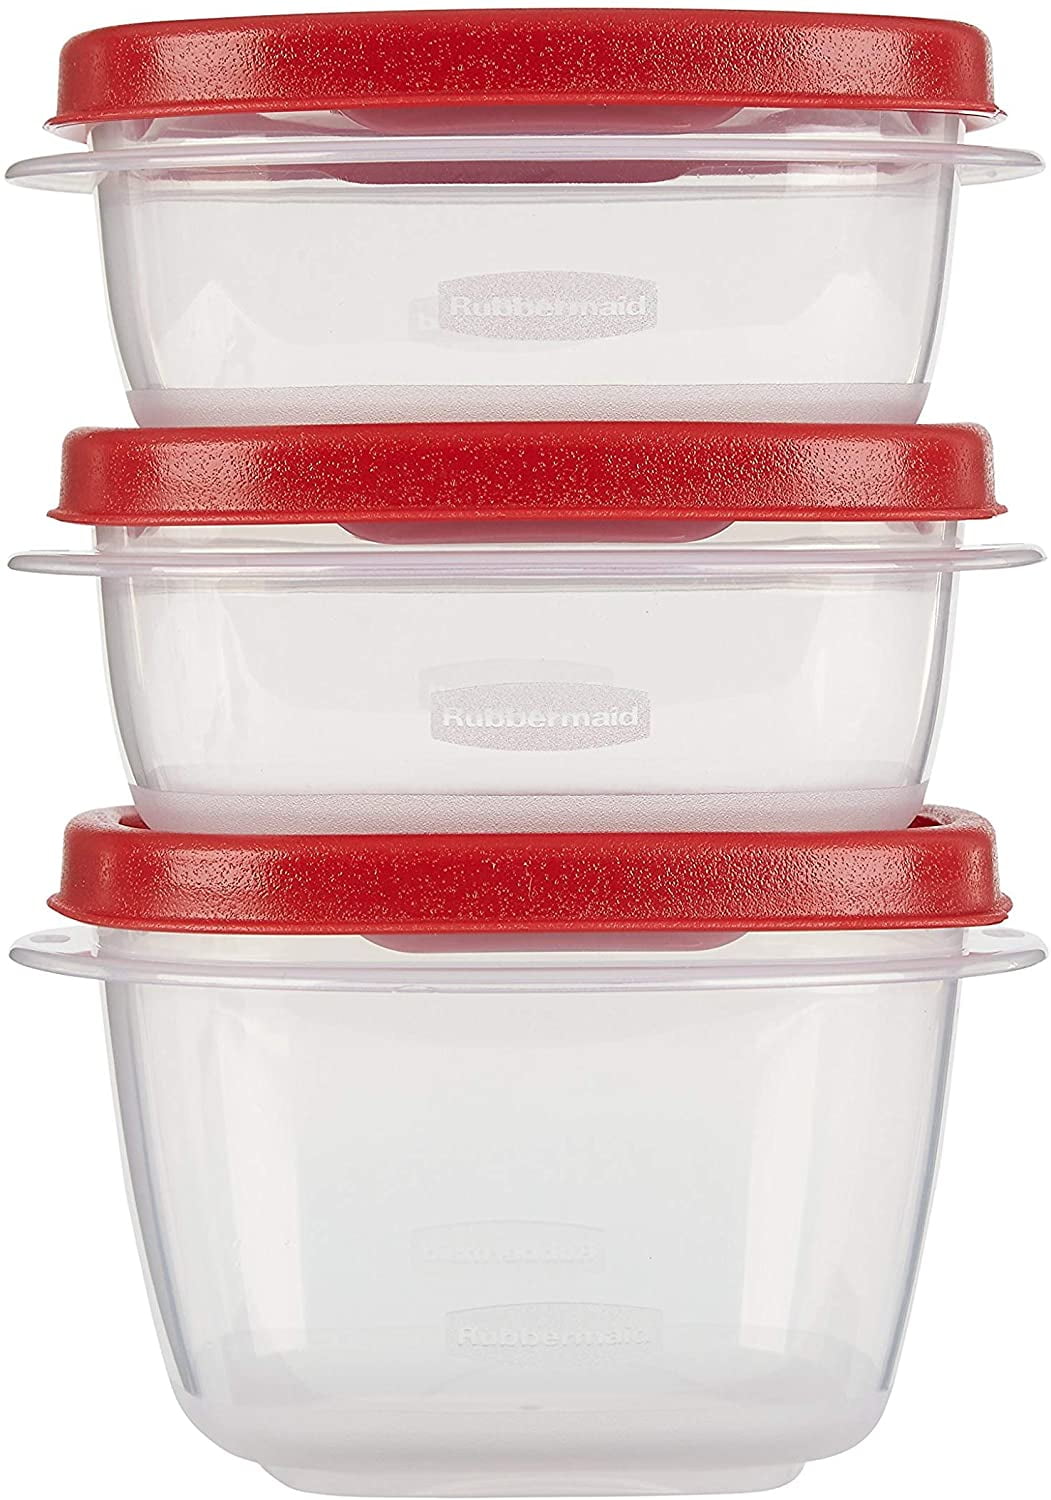 Rubbermaid Containers & Lids, Large Squares, 11.7 Cup 2 Ea